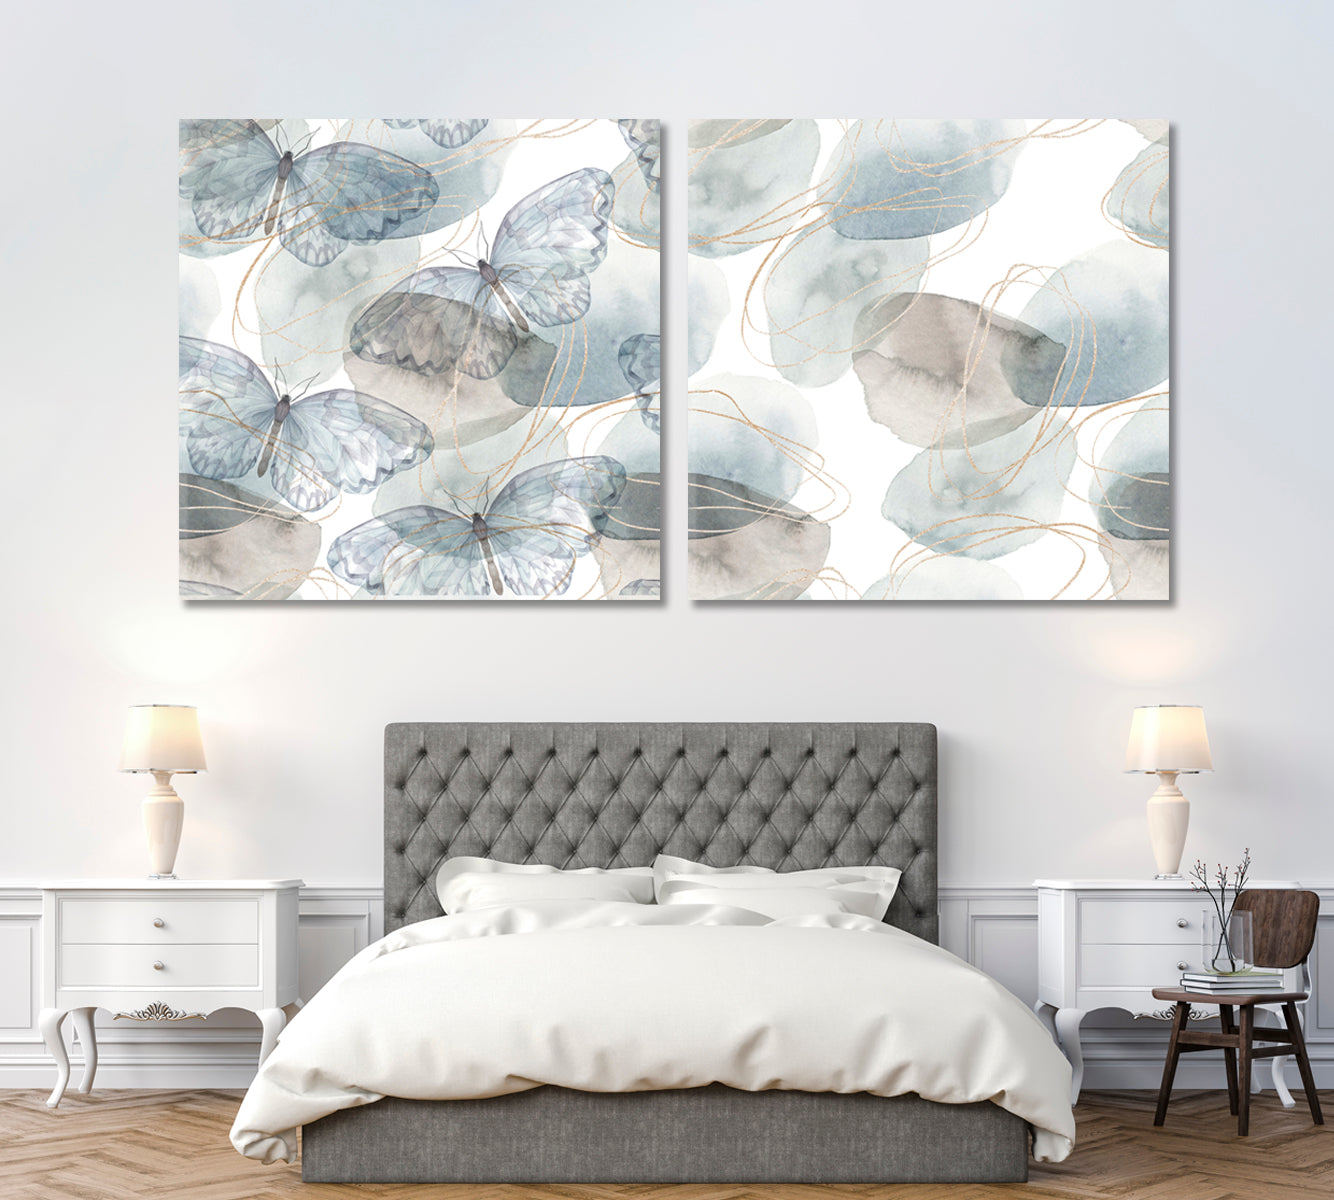 Set of 2 Squares Abstract Butterflies Canvas Print ArtLexy   